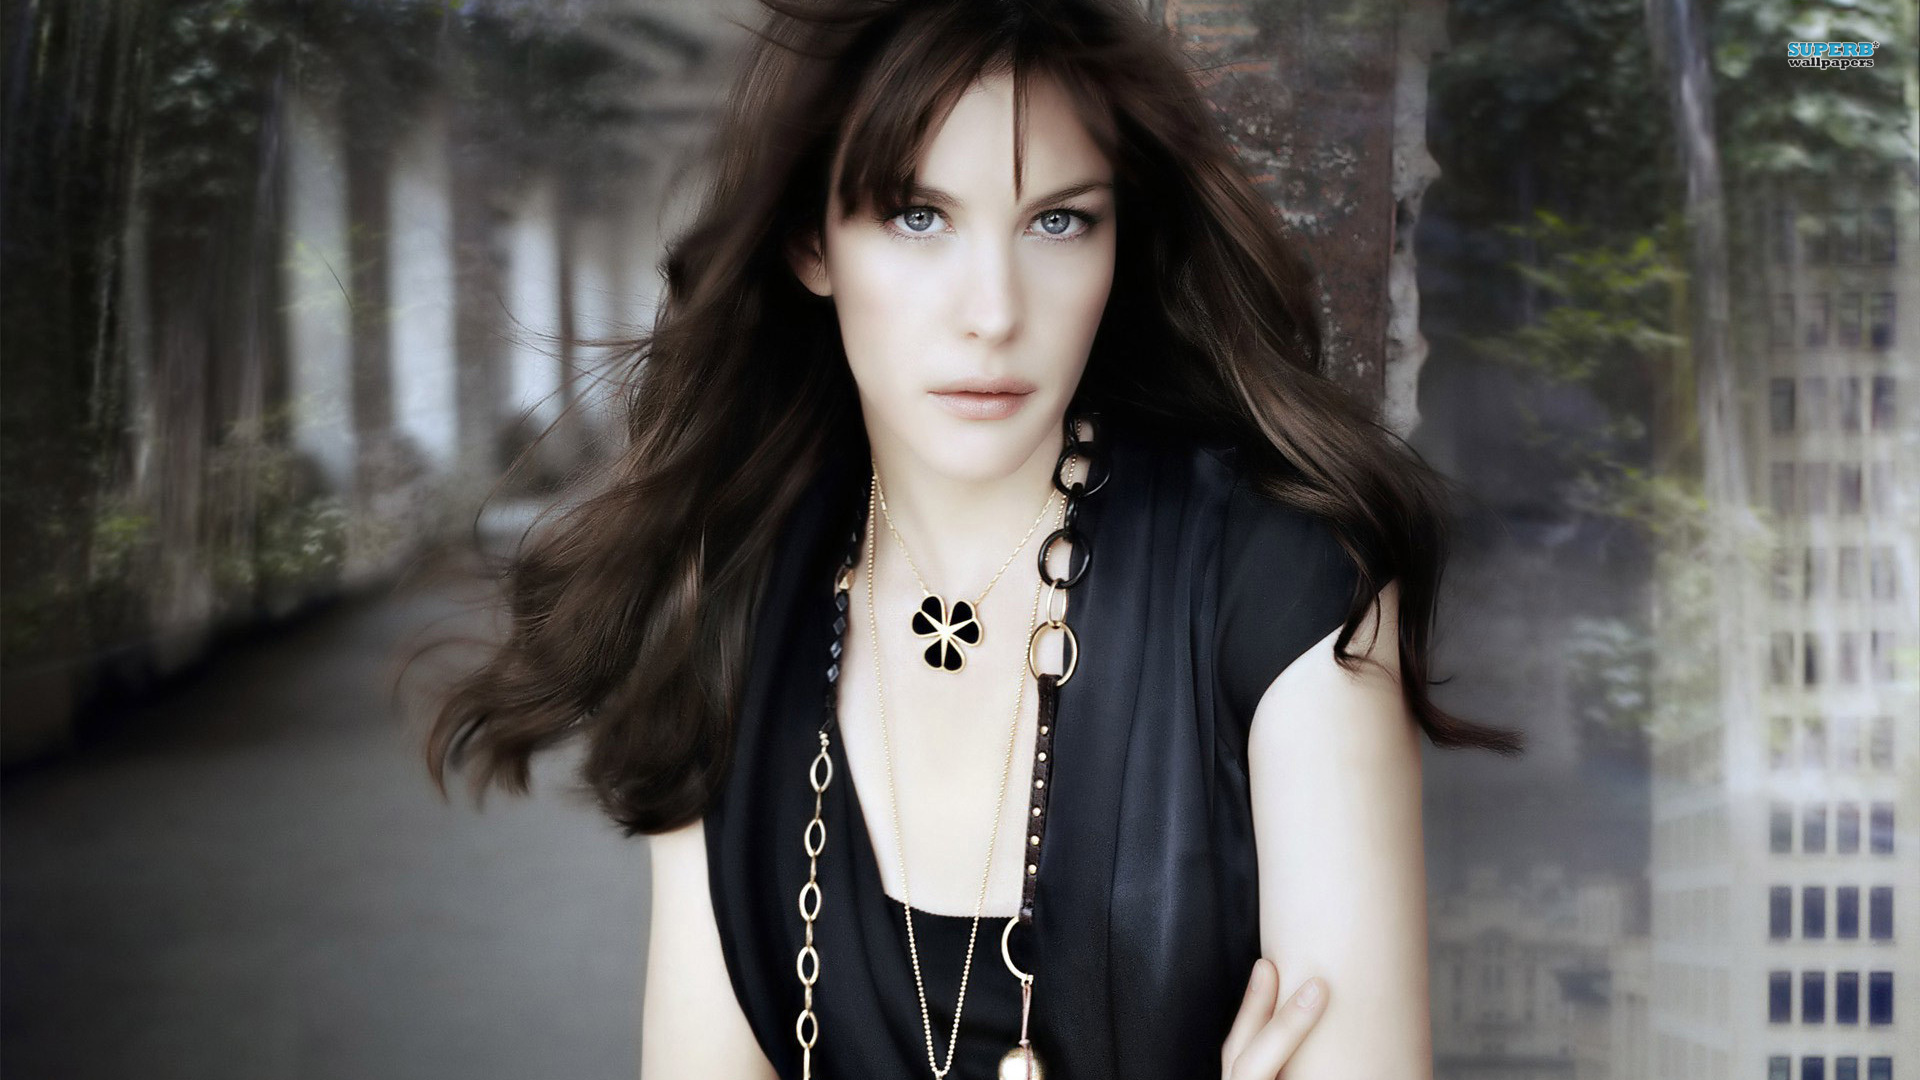 Magnificent Liv Tyler Wallpaper Full HD Pictures